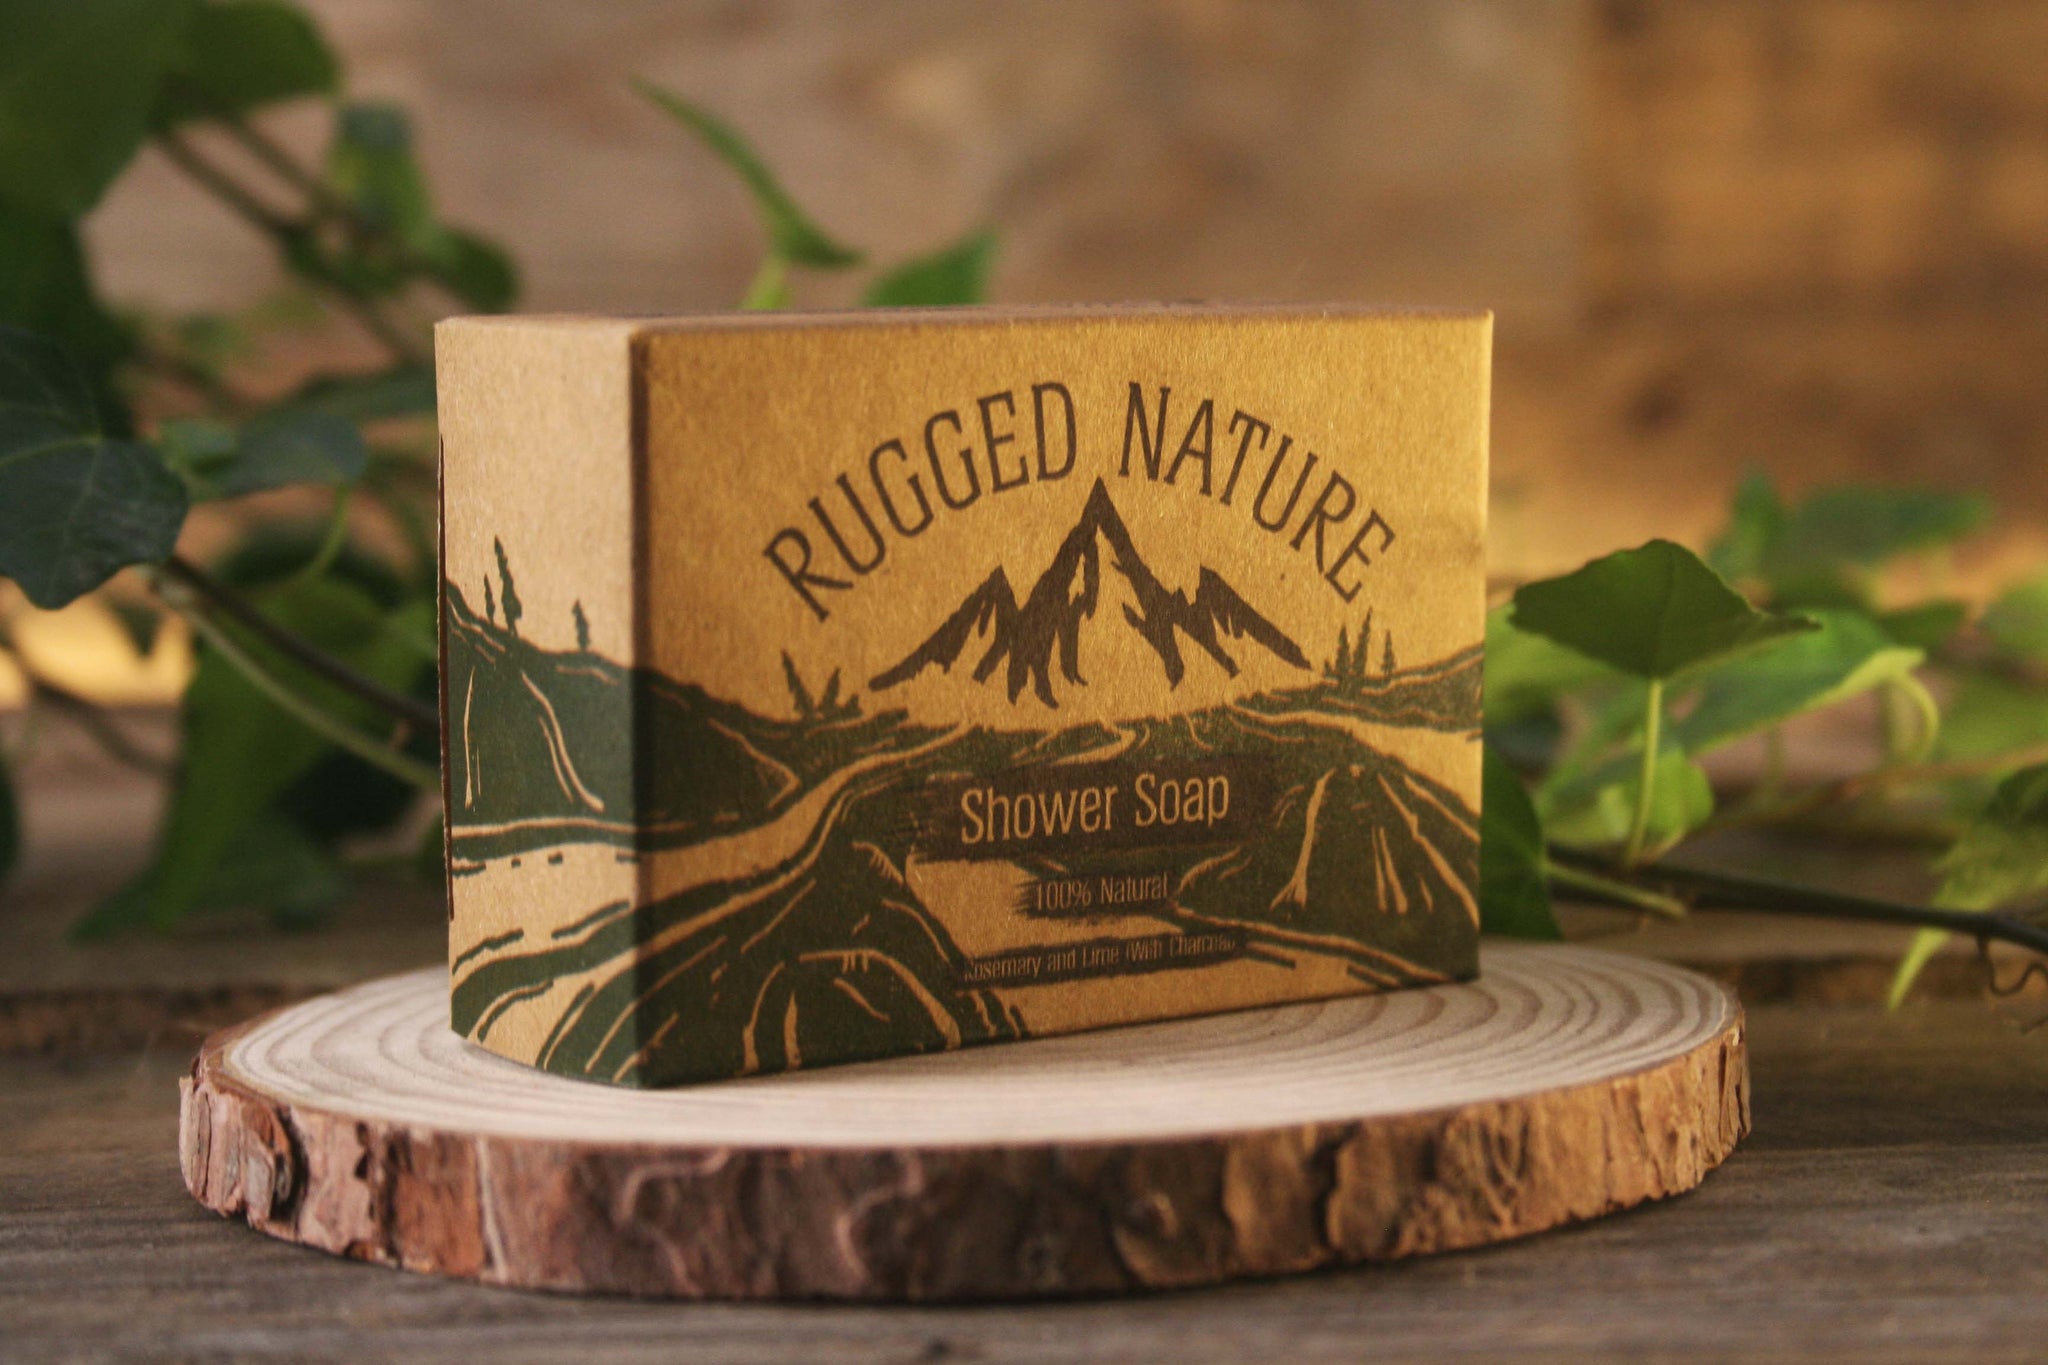 Rugged Nature Shower Soap With Charcoal